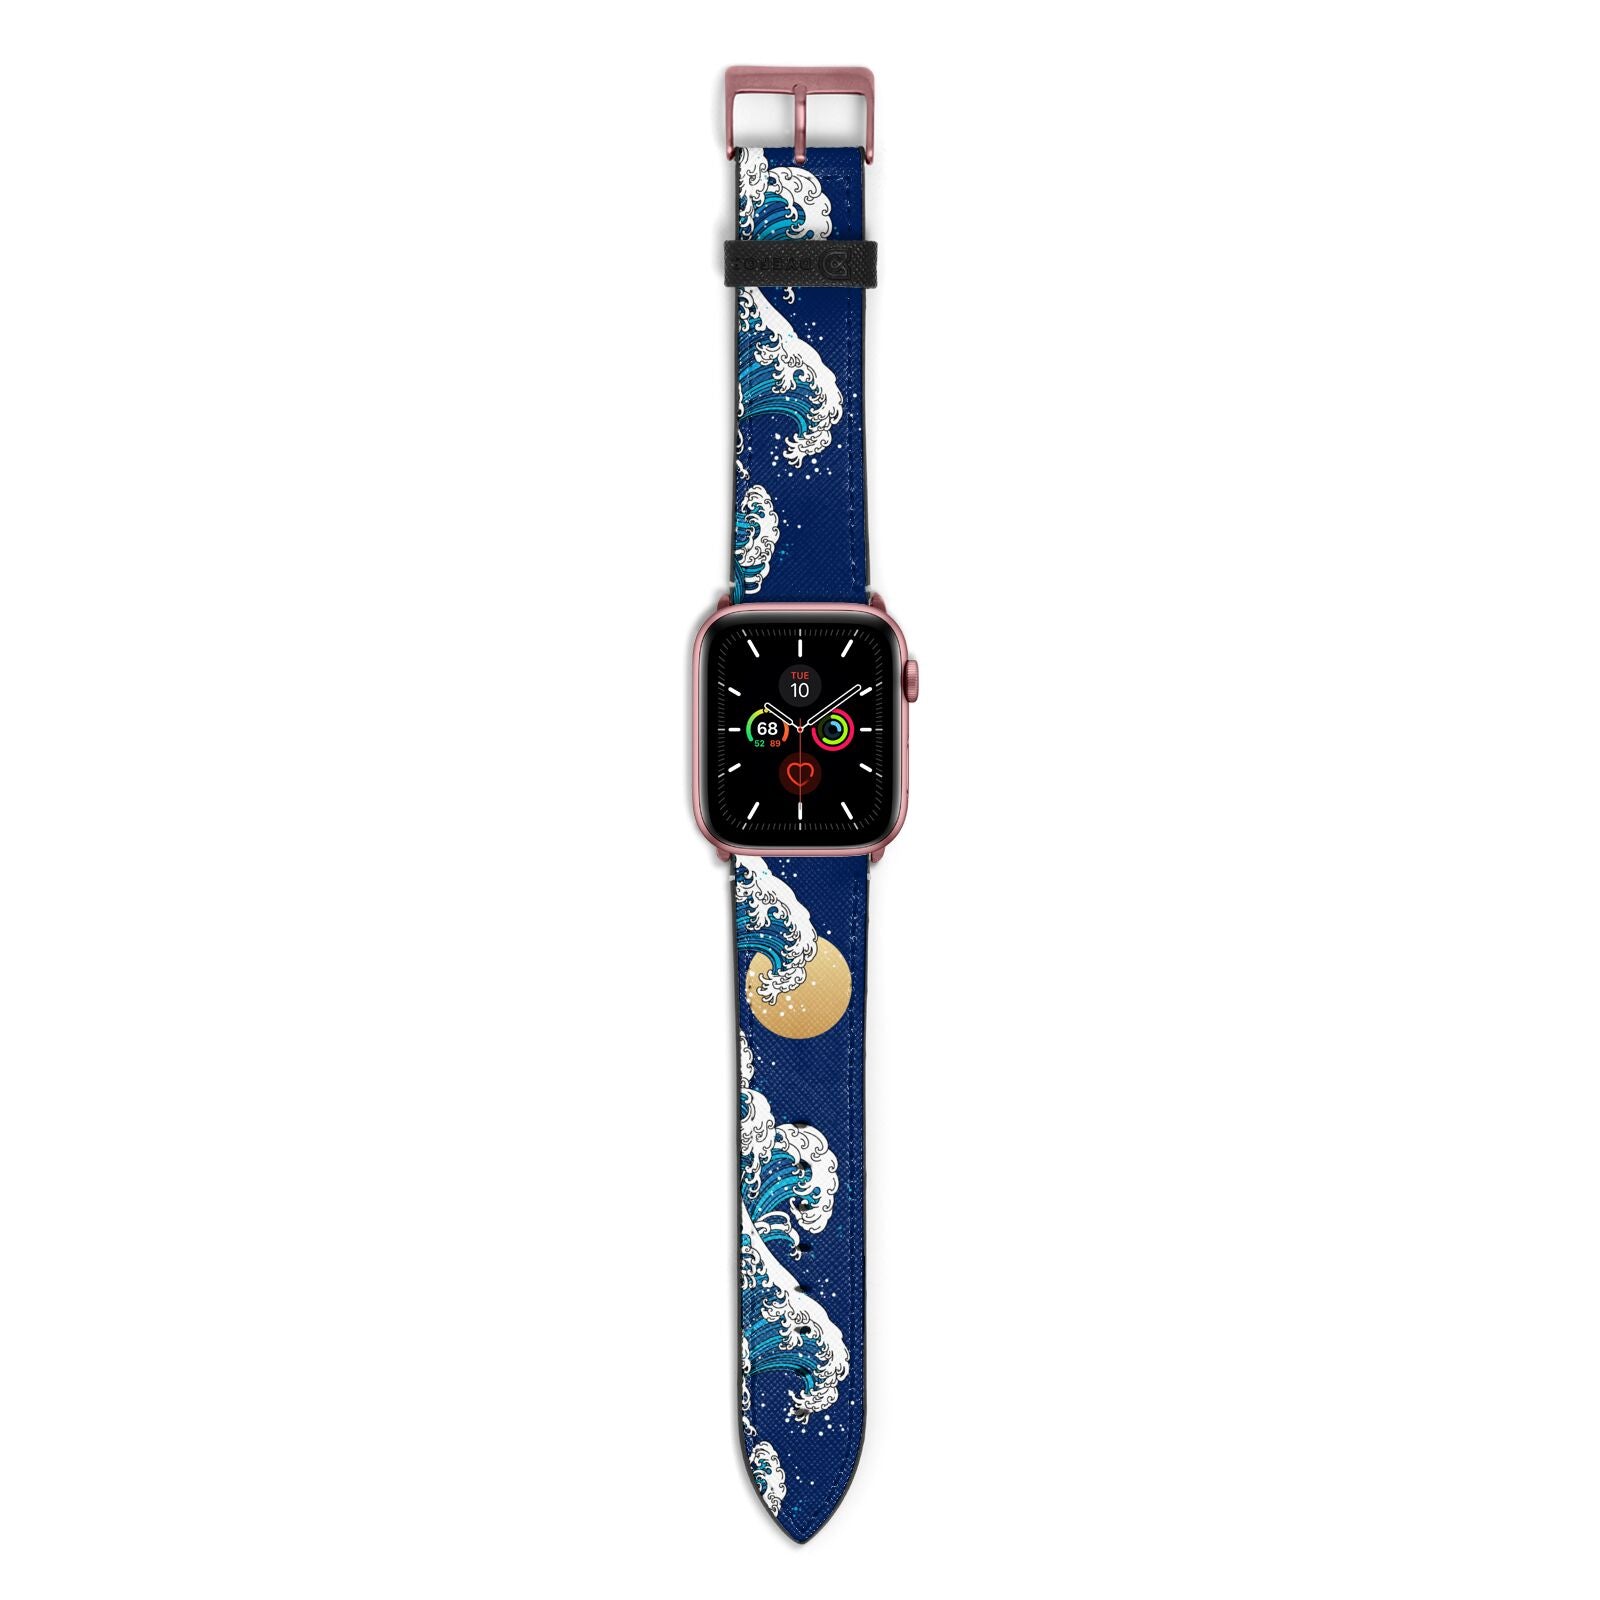 Hokusai Japanese Waves Apple Watch Strap with Rose Gold Hardware